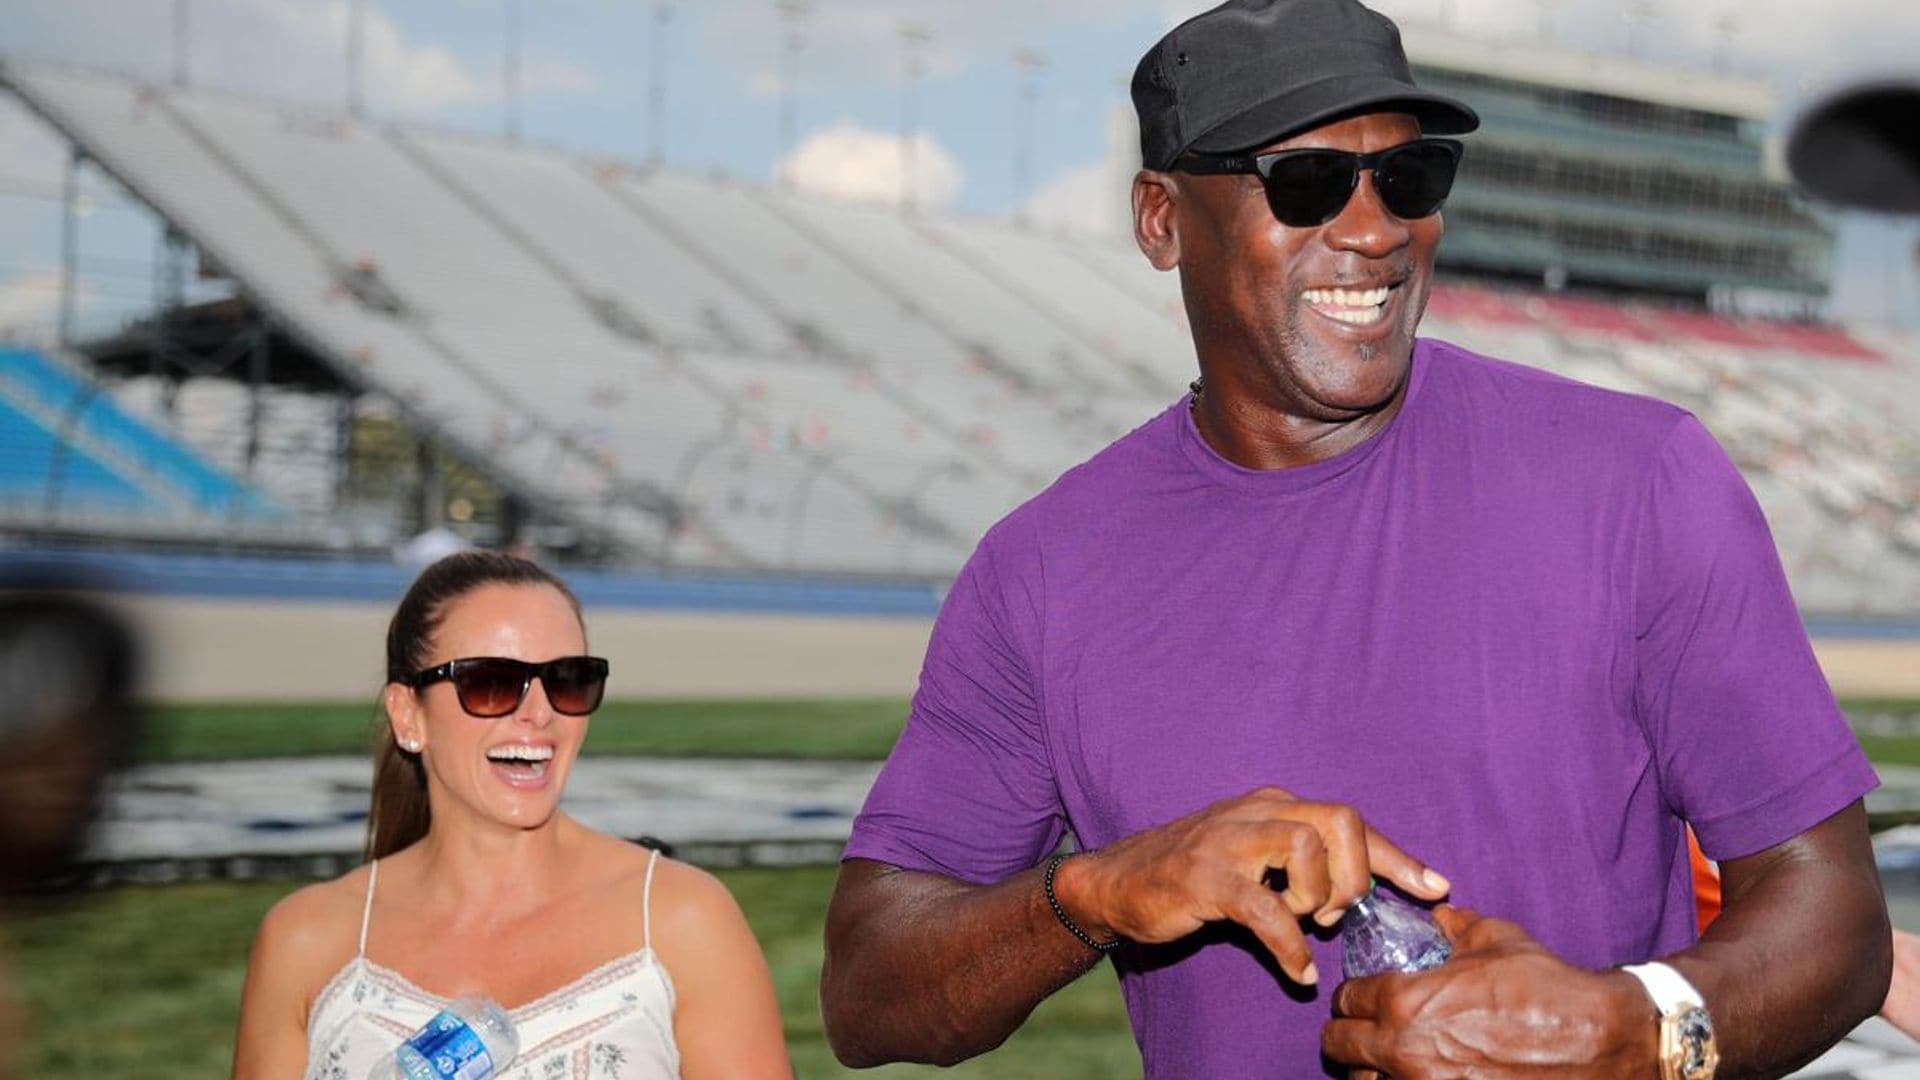 Michael Jordan and his wife Yvette Prieto over the years [Photos]